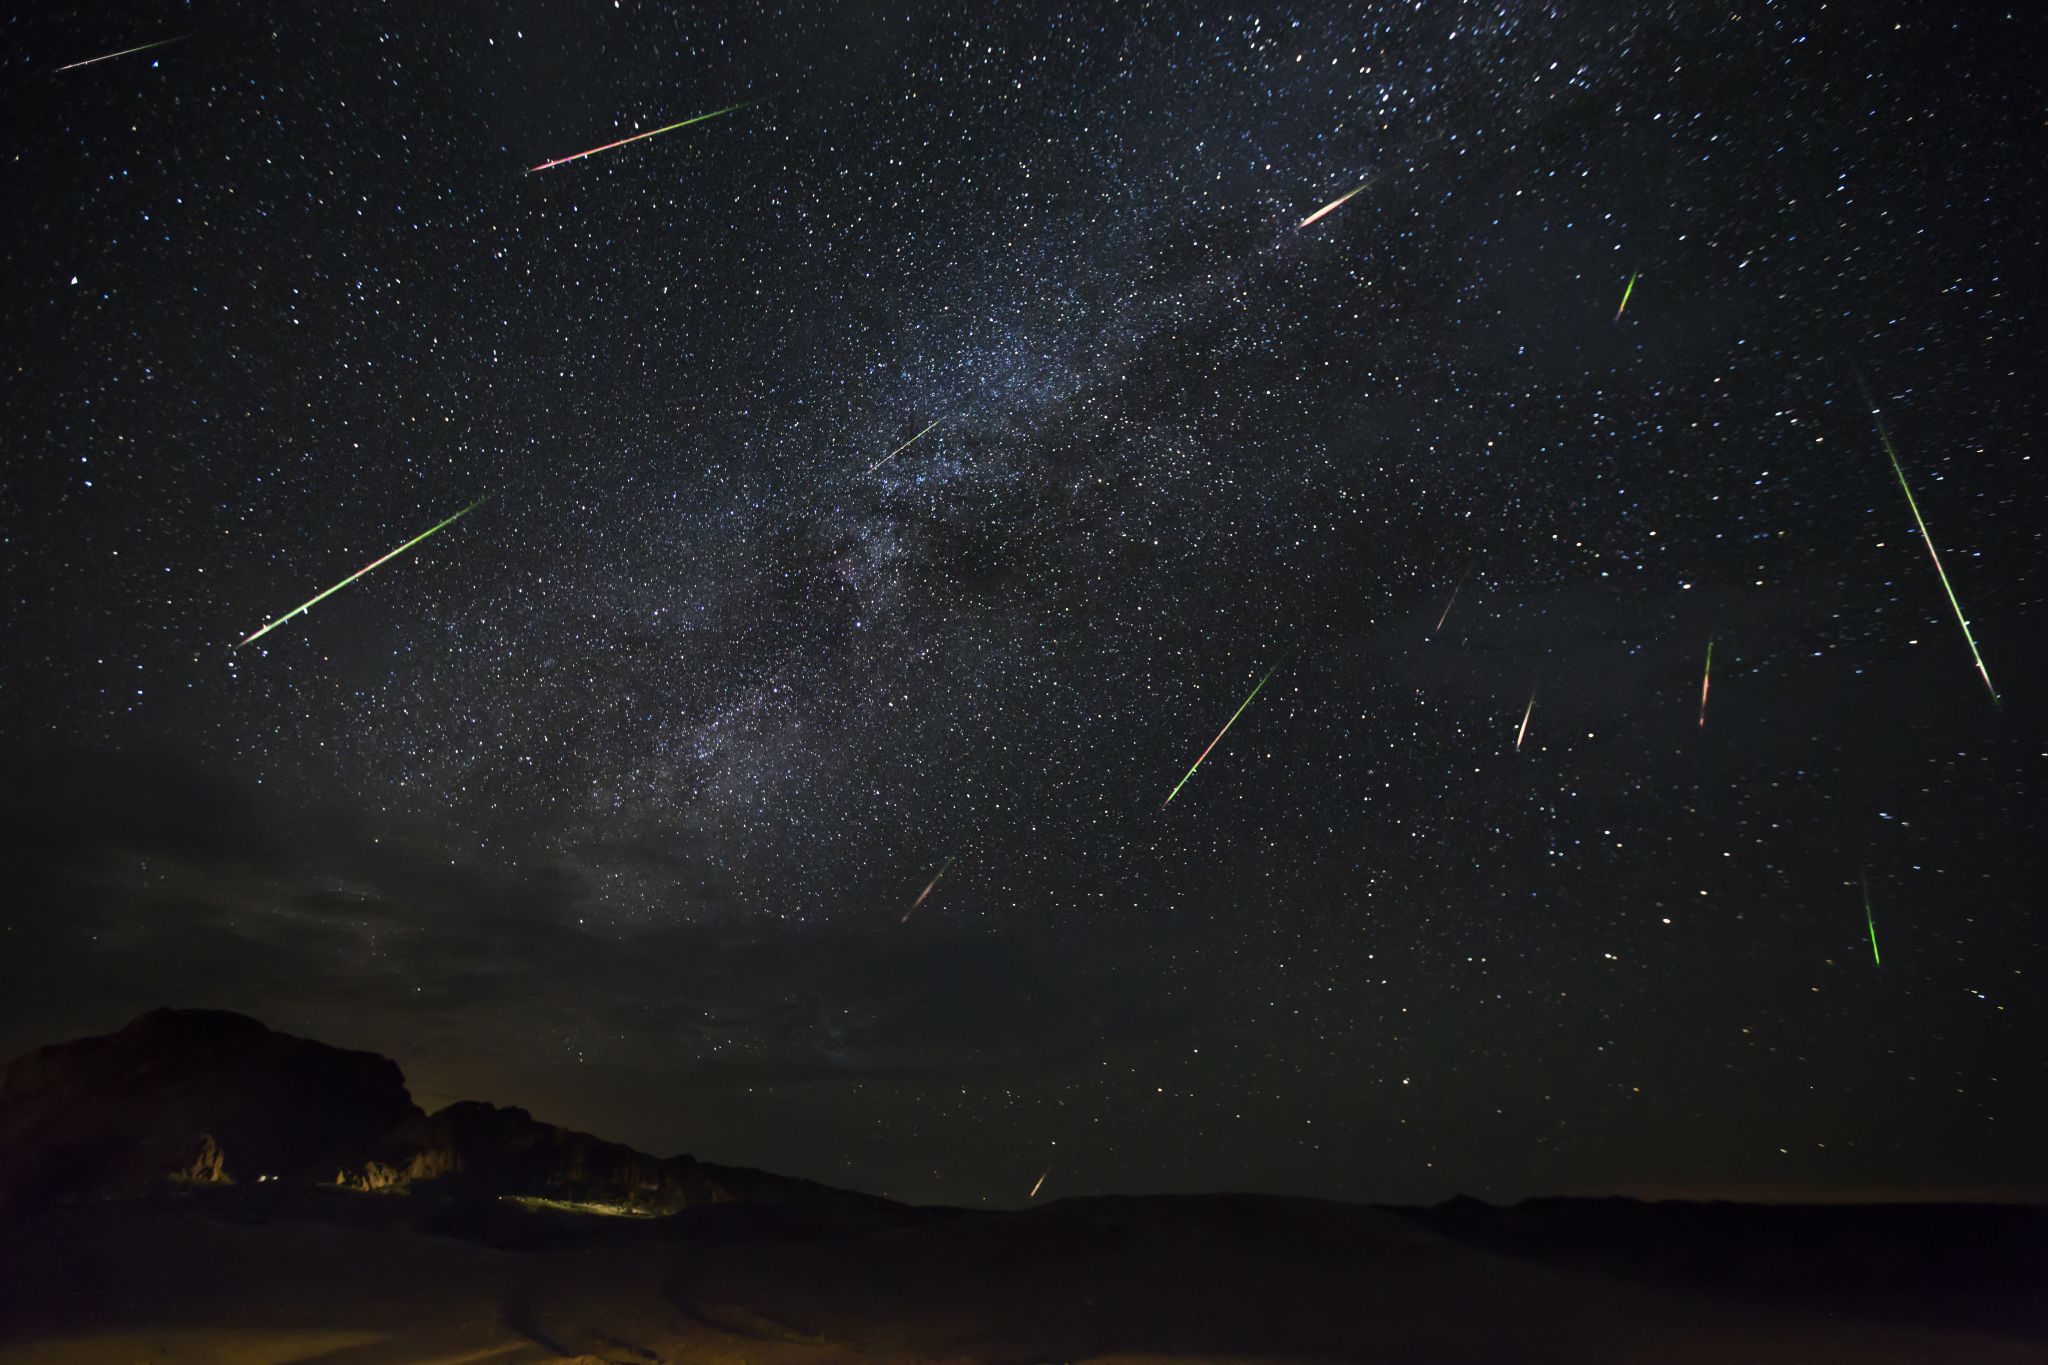 Weather looks promising with Perseid meteor showers in the San Francisco Bay Area